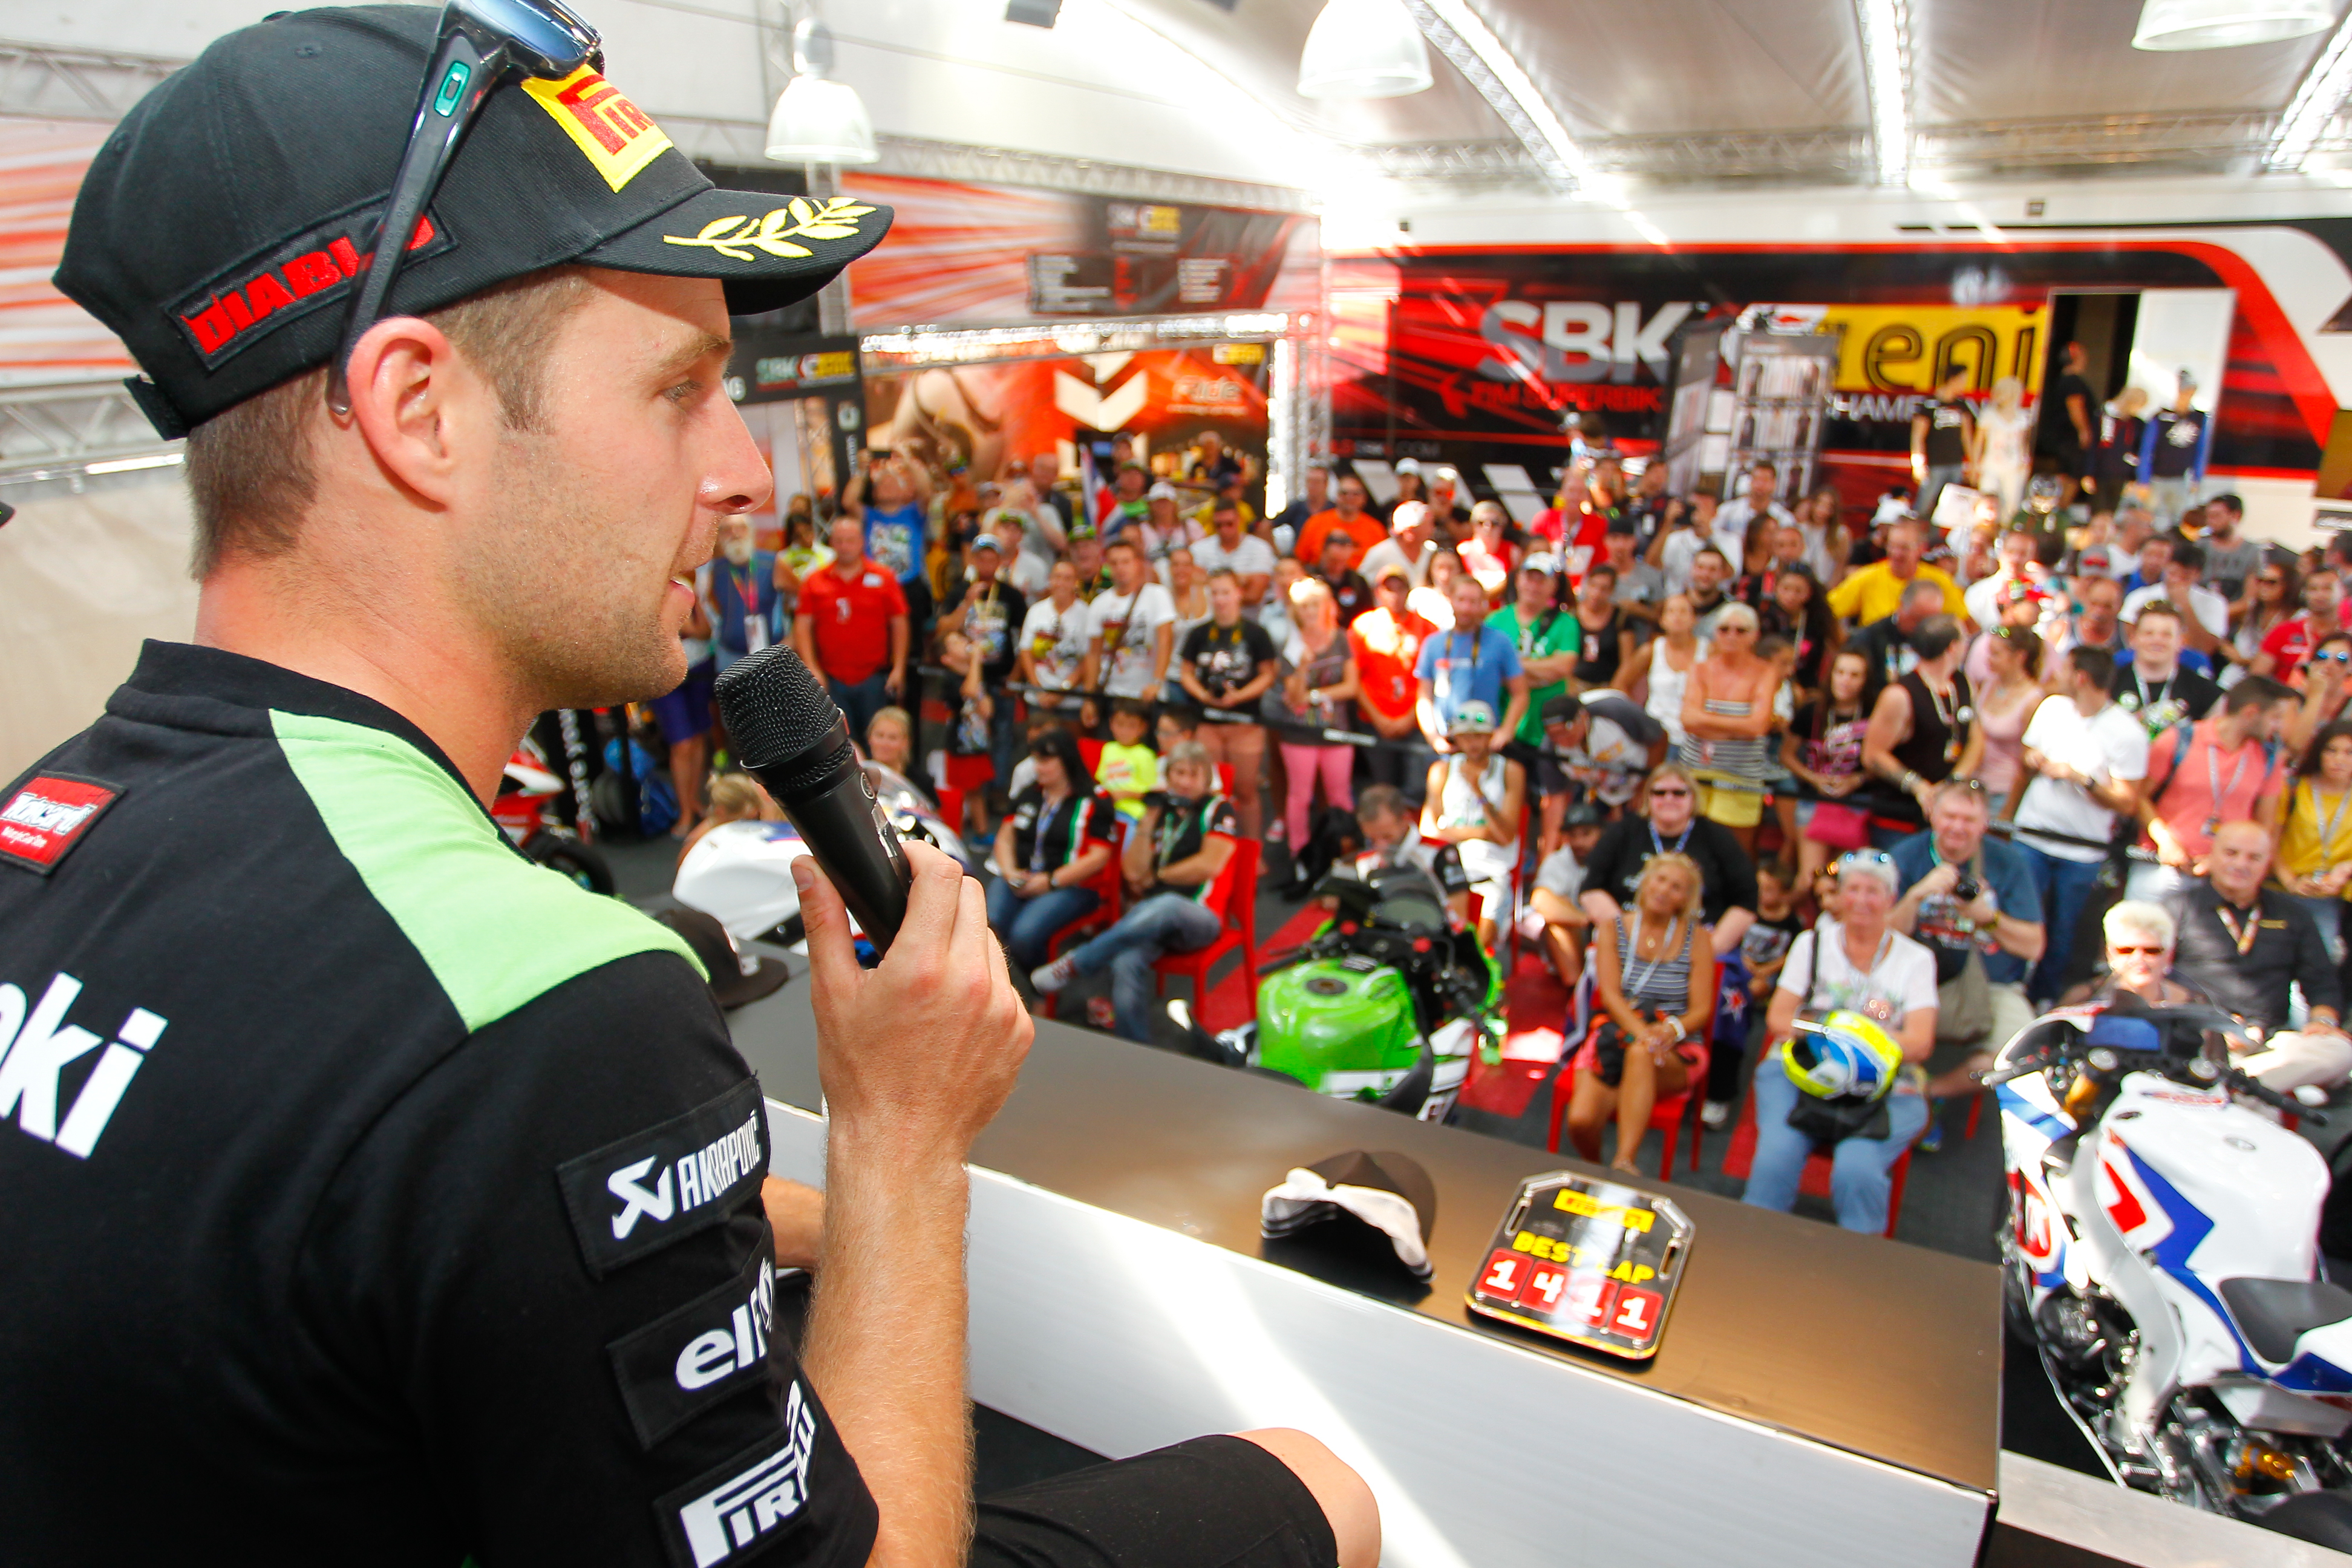 worldsbk-ready-for-another-massive-presence-at-eicma-d4303529-44f8-4d0e-9d6d-317b6a169e38